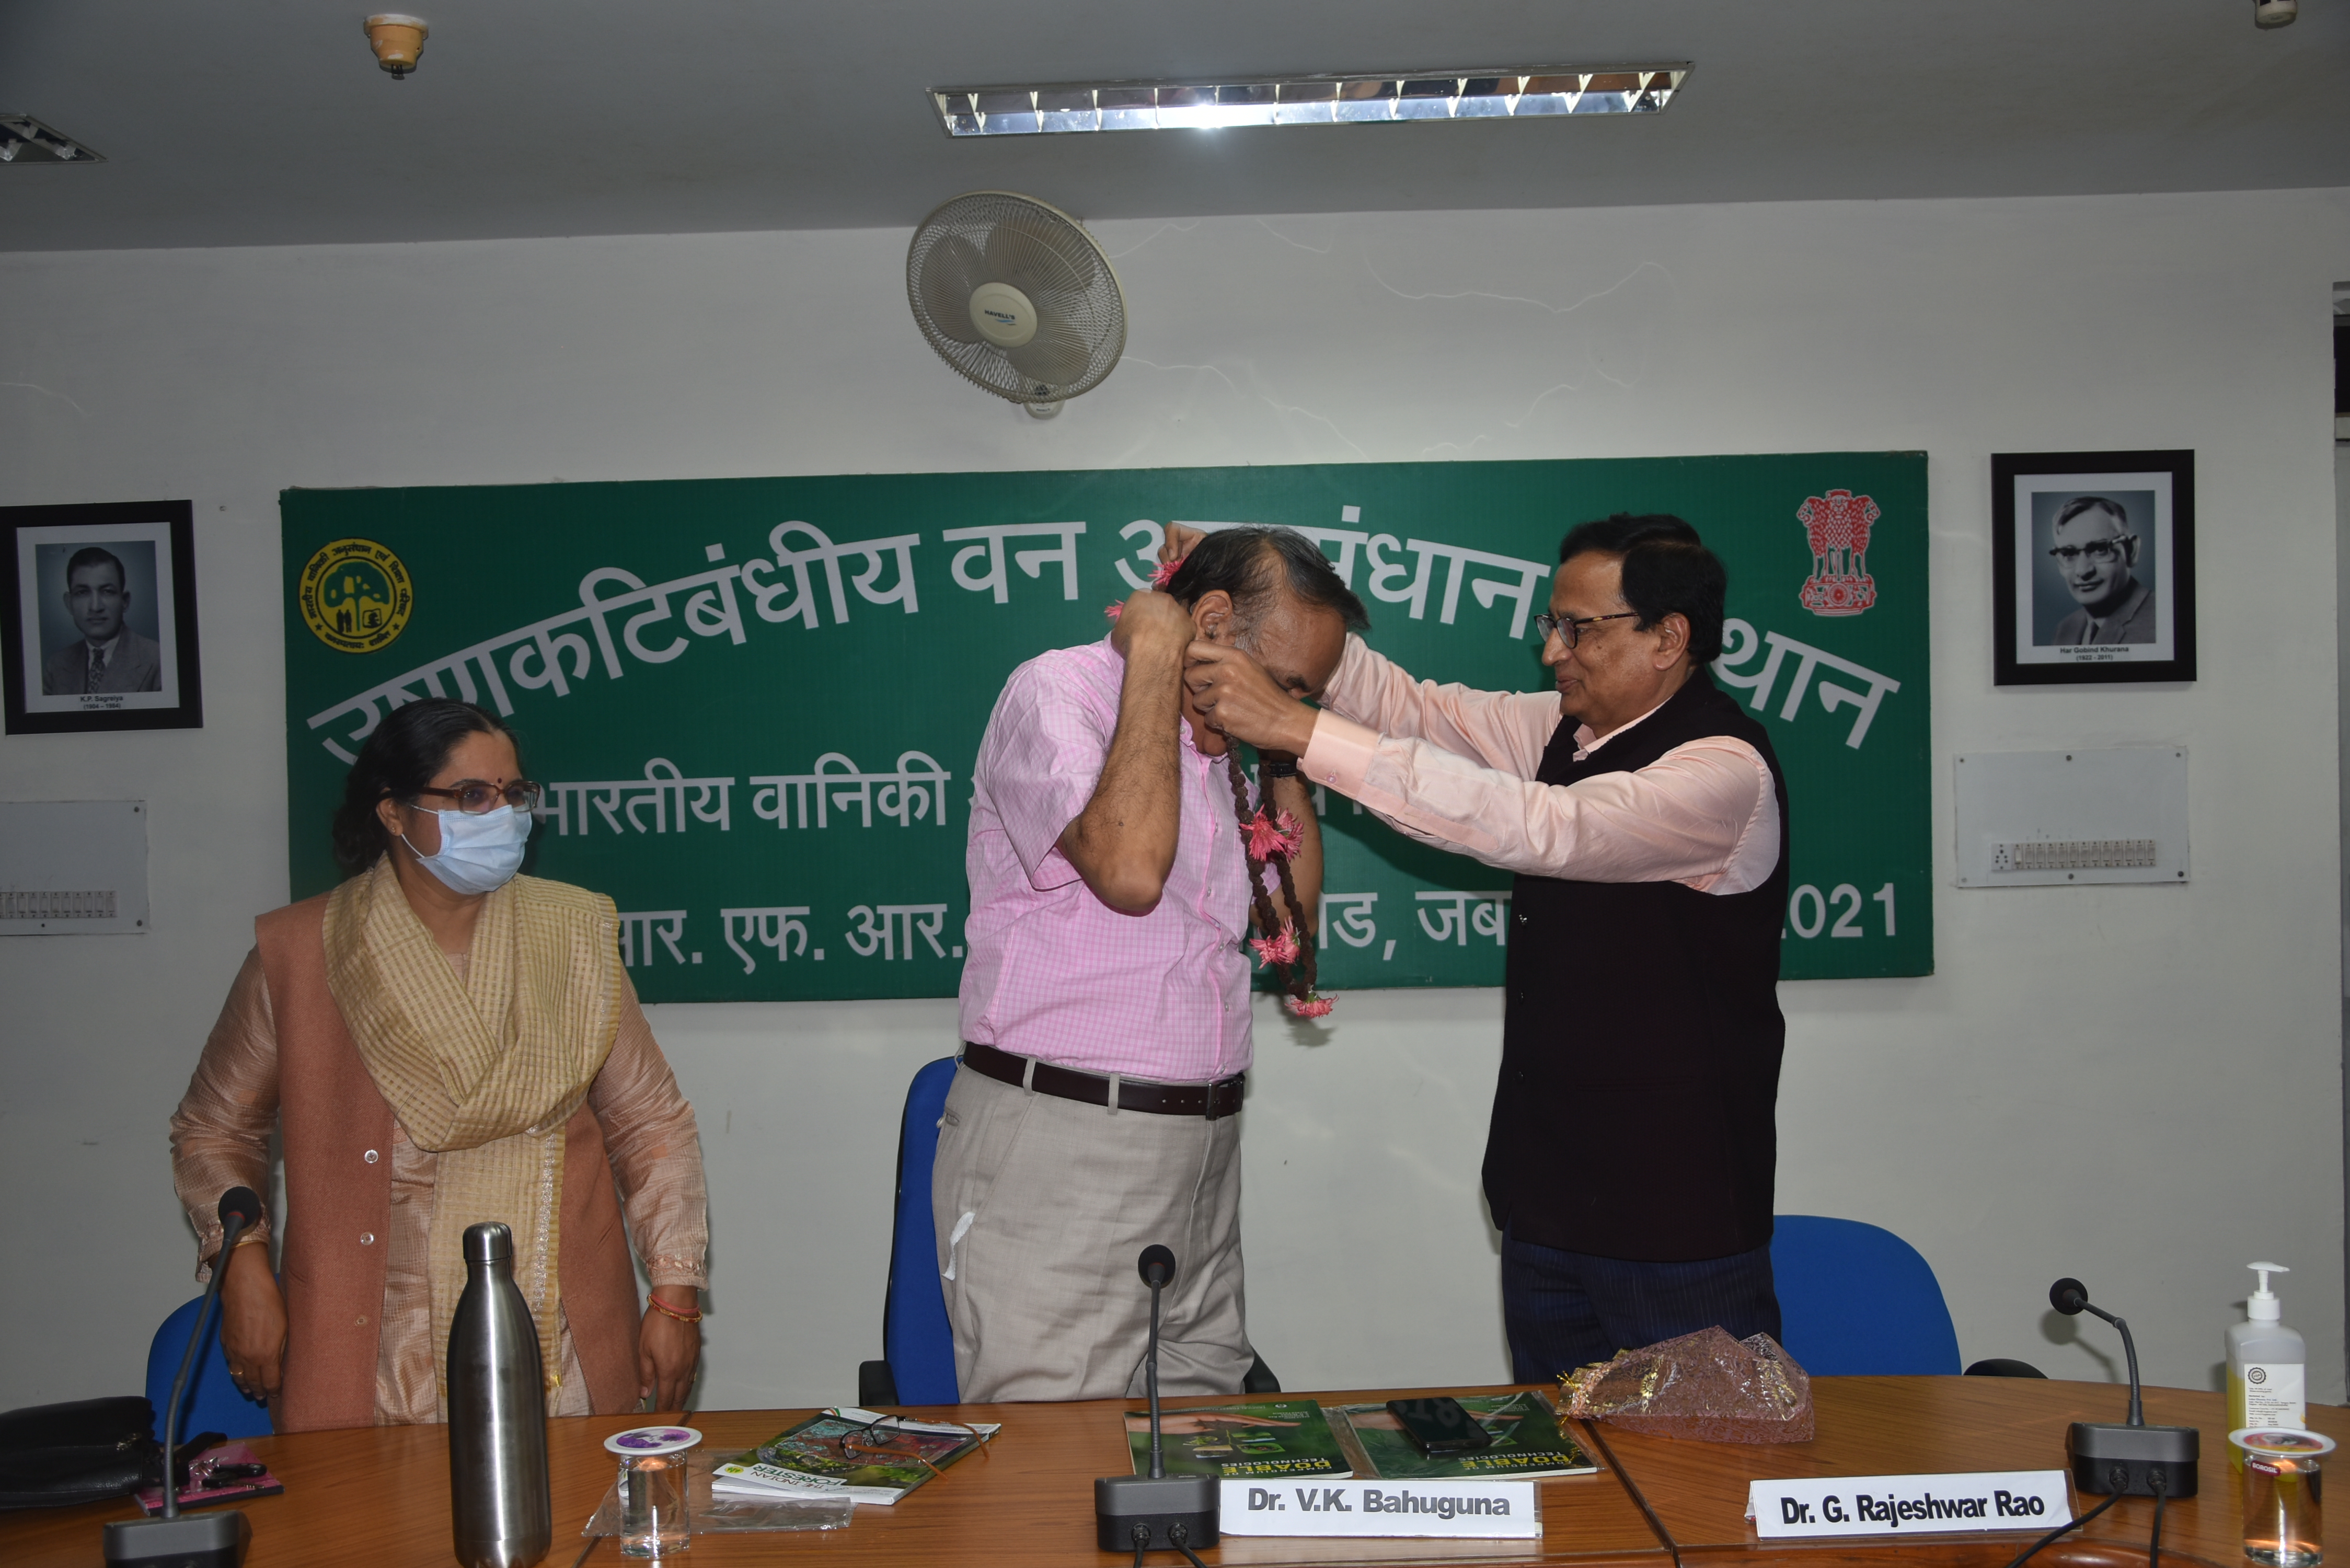 Visit of Dr. V.K. Bahuguna, former Director General, Indian Council of Forestry Research and Education (ICFRE) 